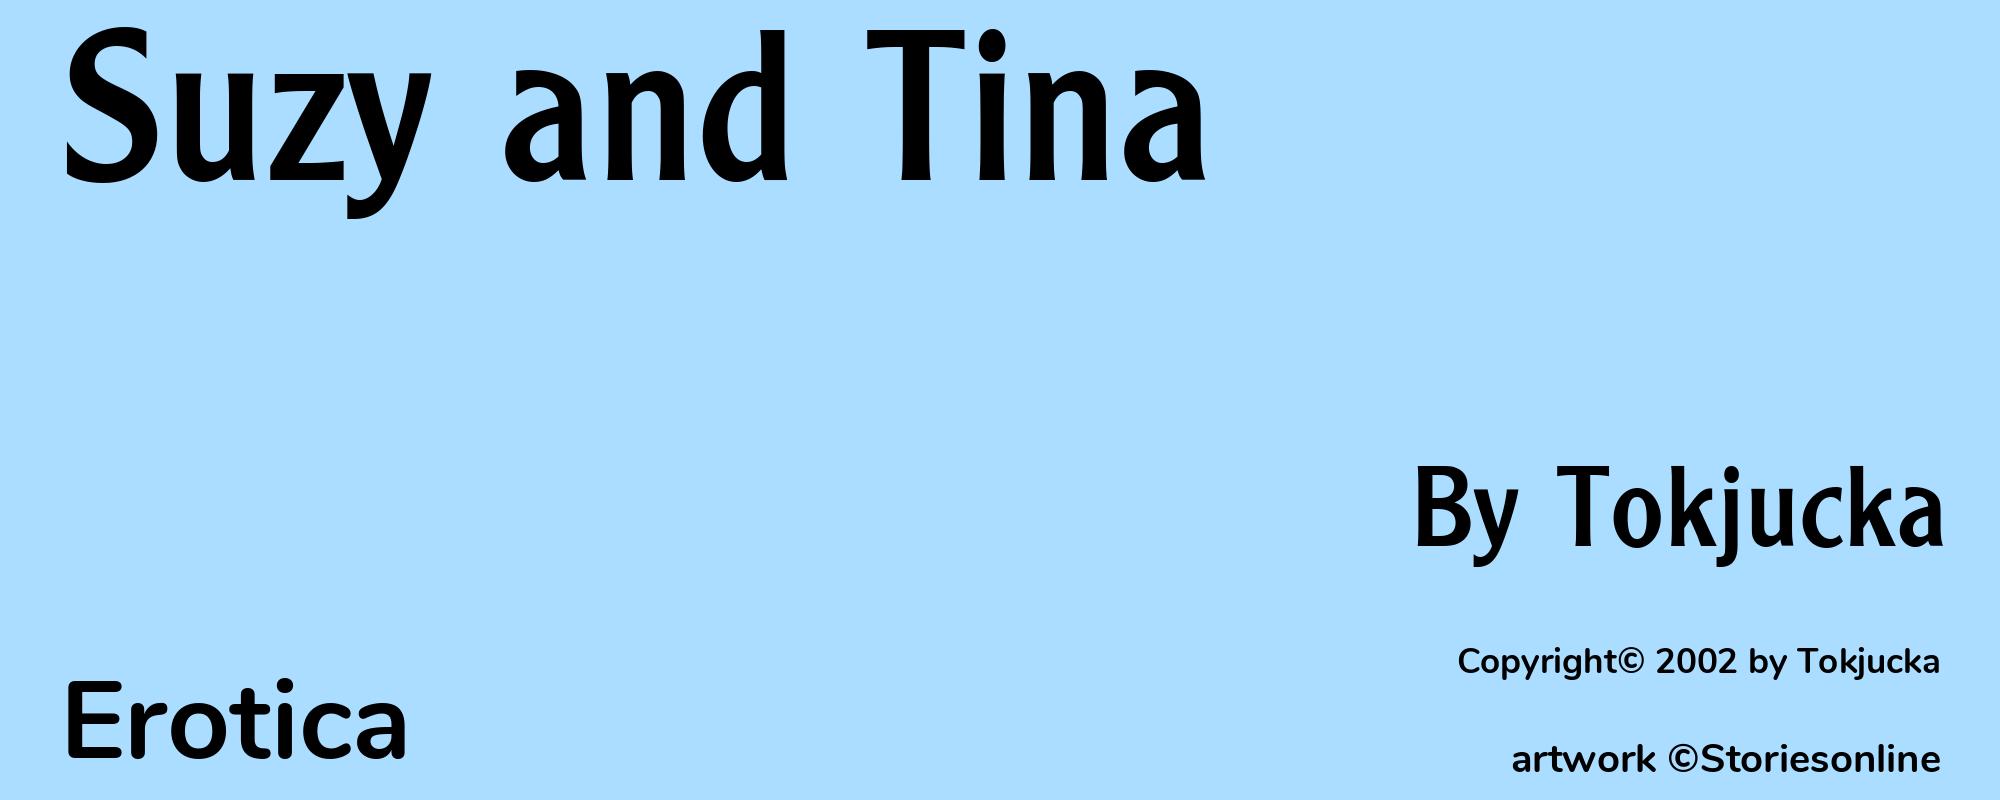 Suzy and Tina - Cover